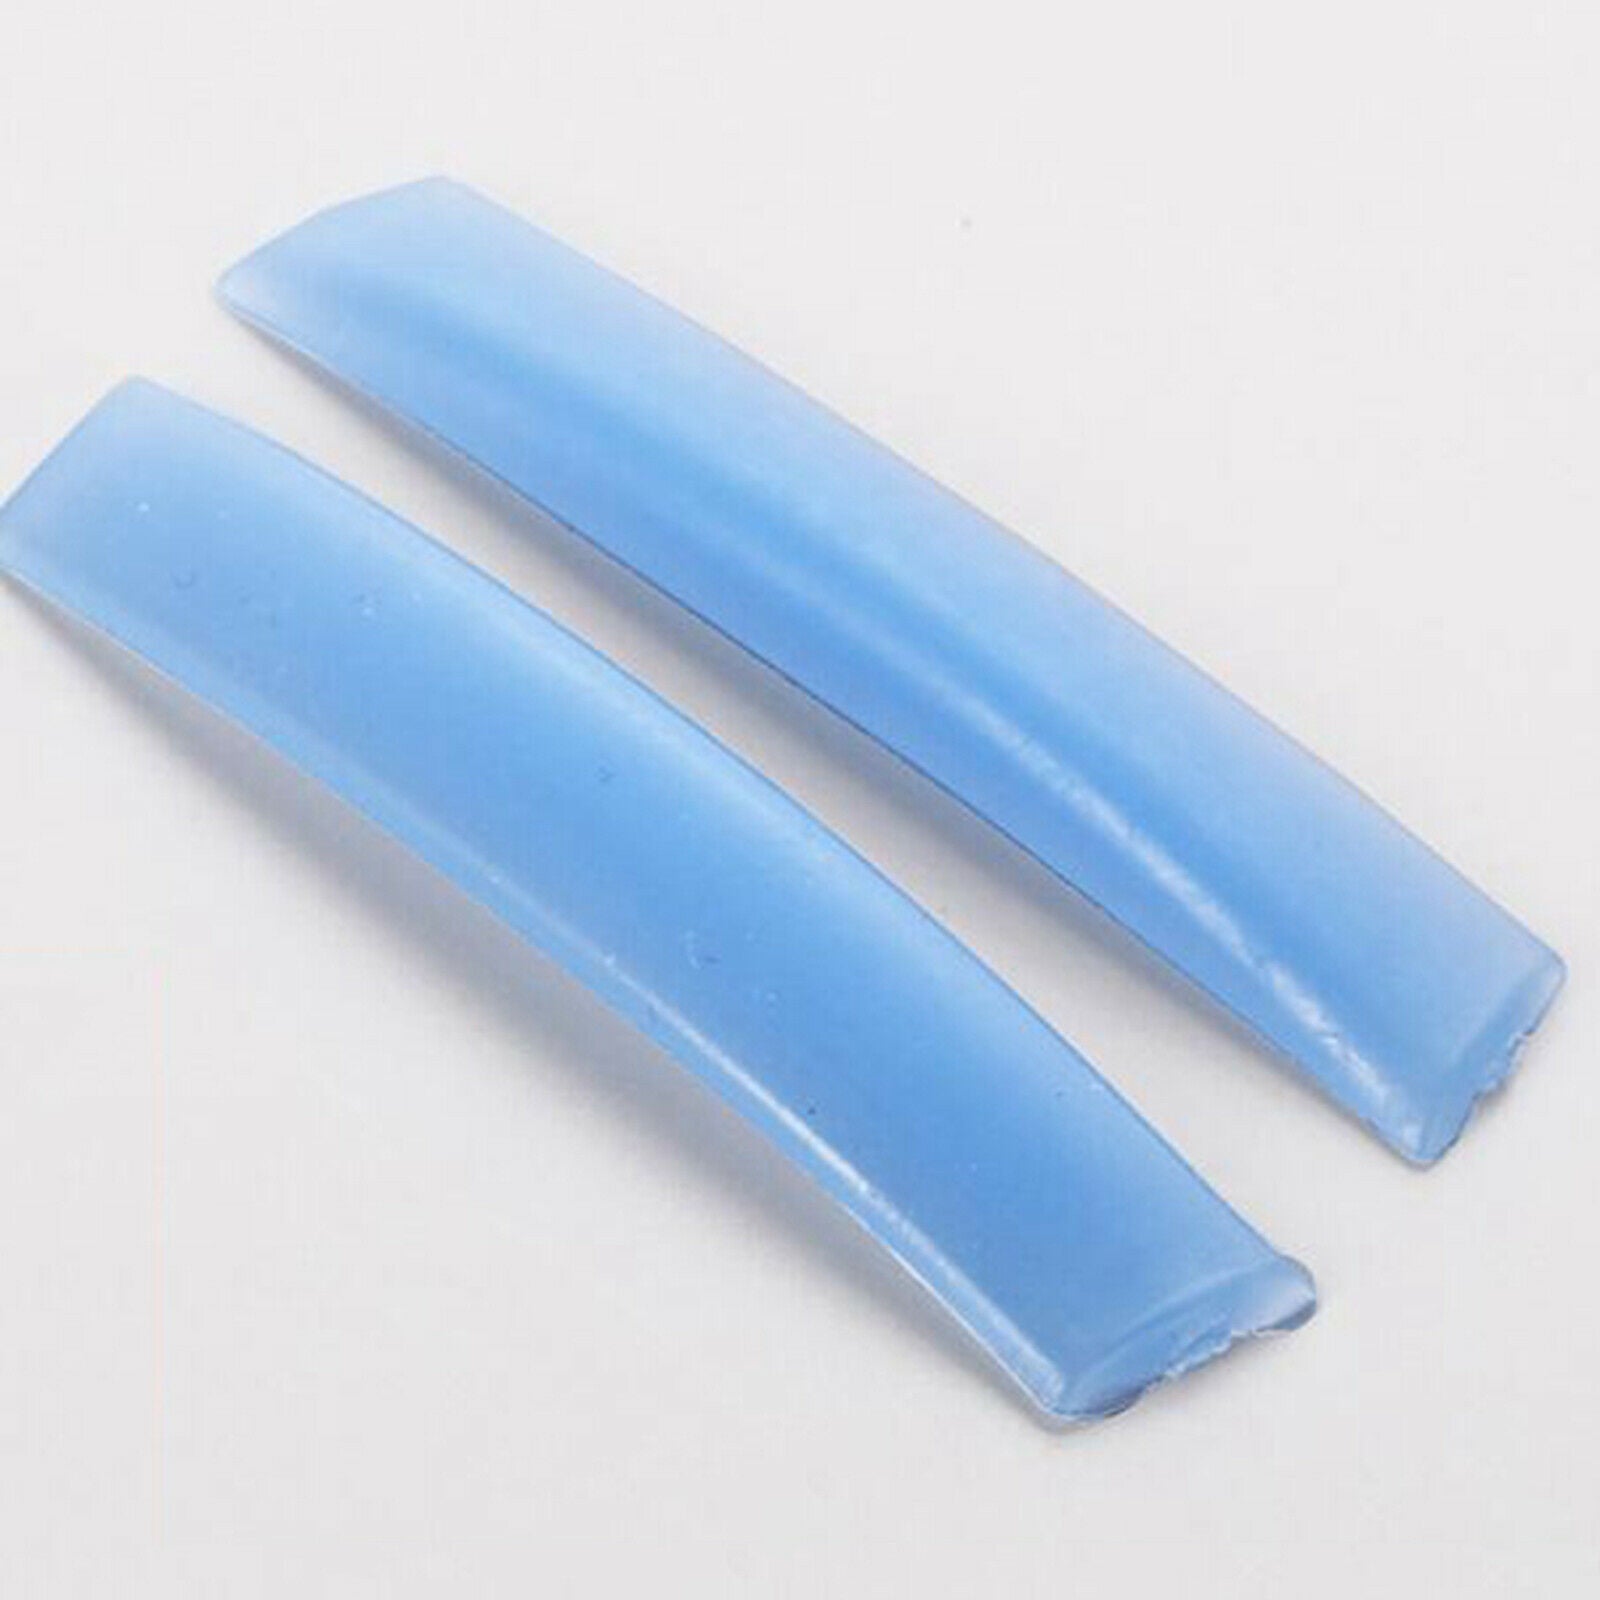 Lash Perm Pads Reusable Silicone Curler Shields for Beauty Tool Lash Listing